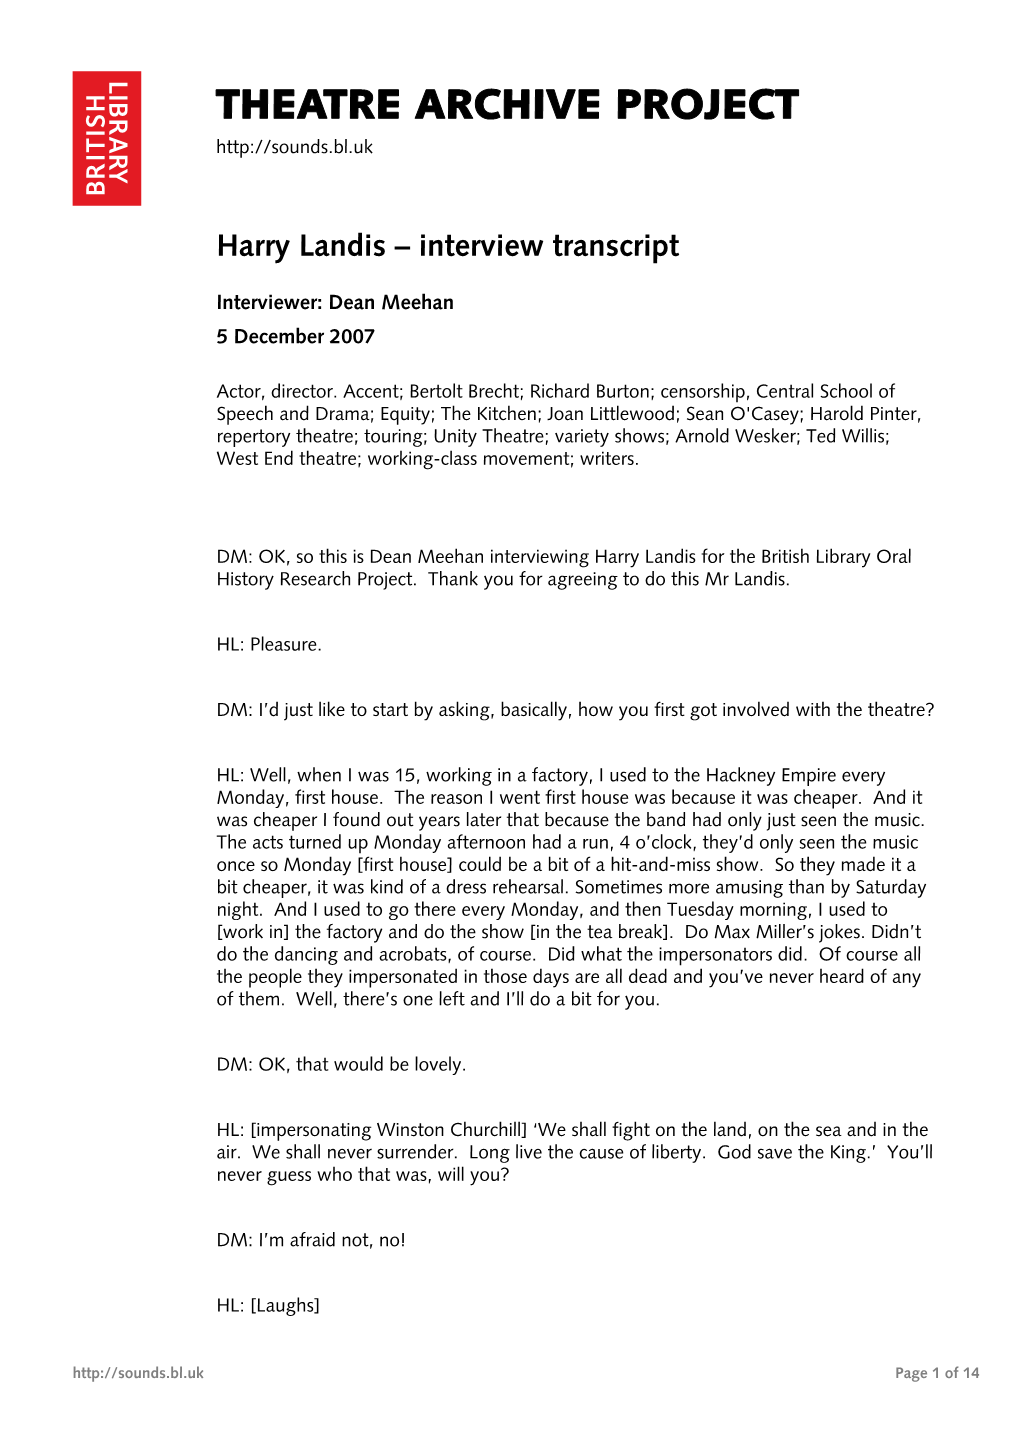 Interview with Harry Landis